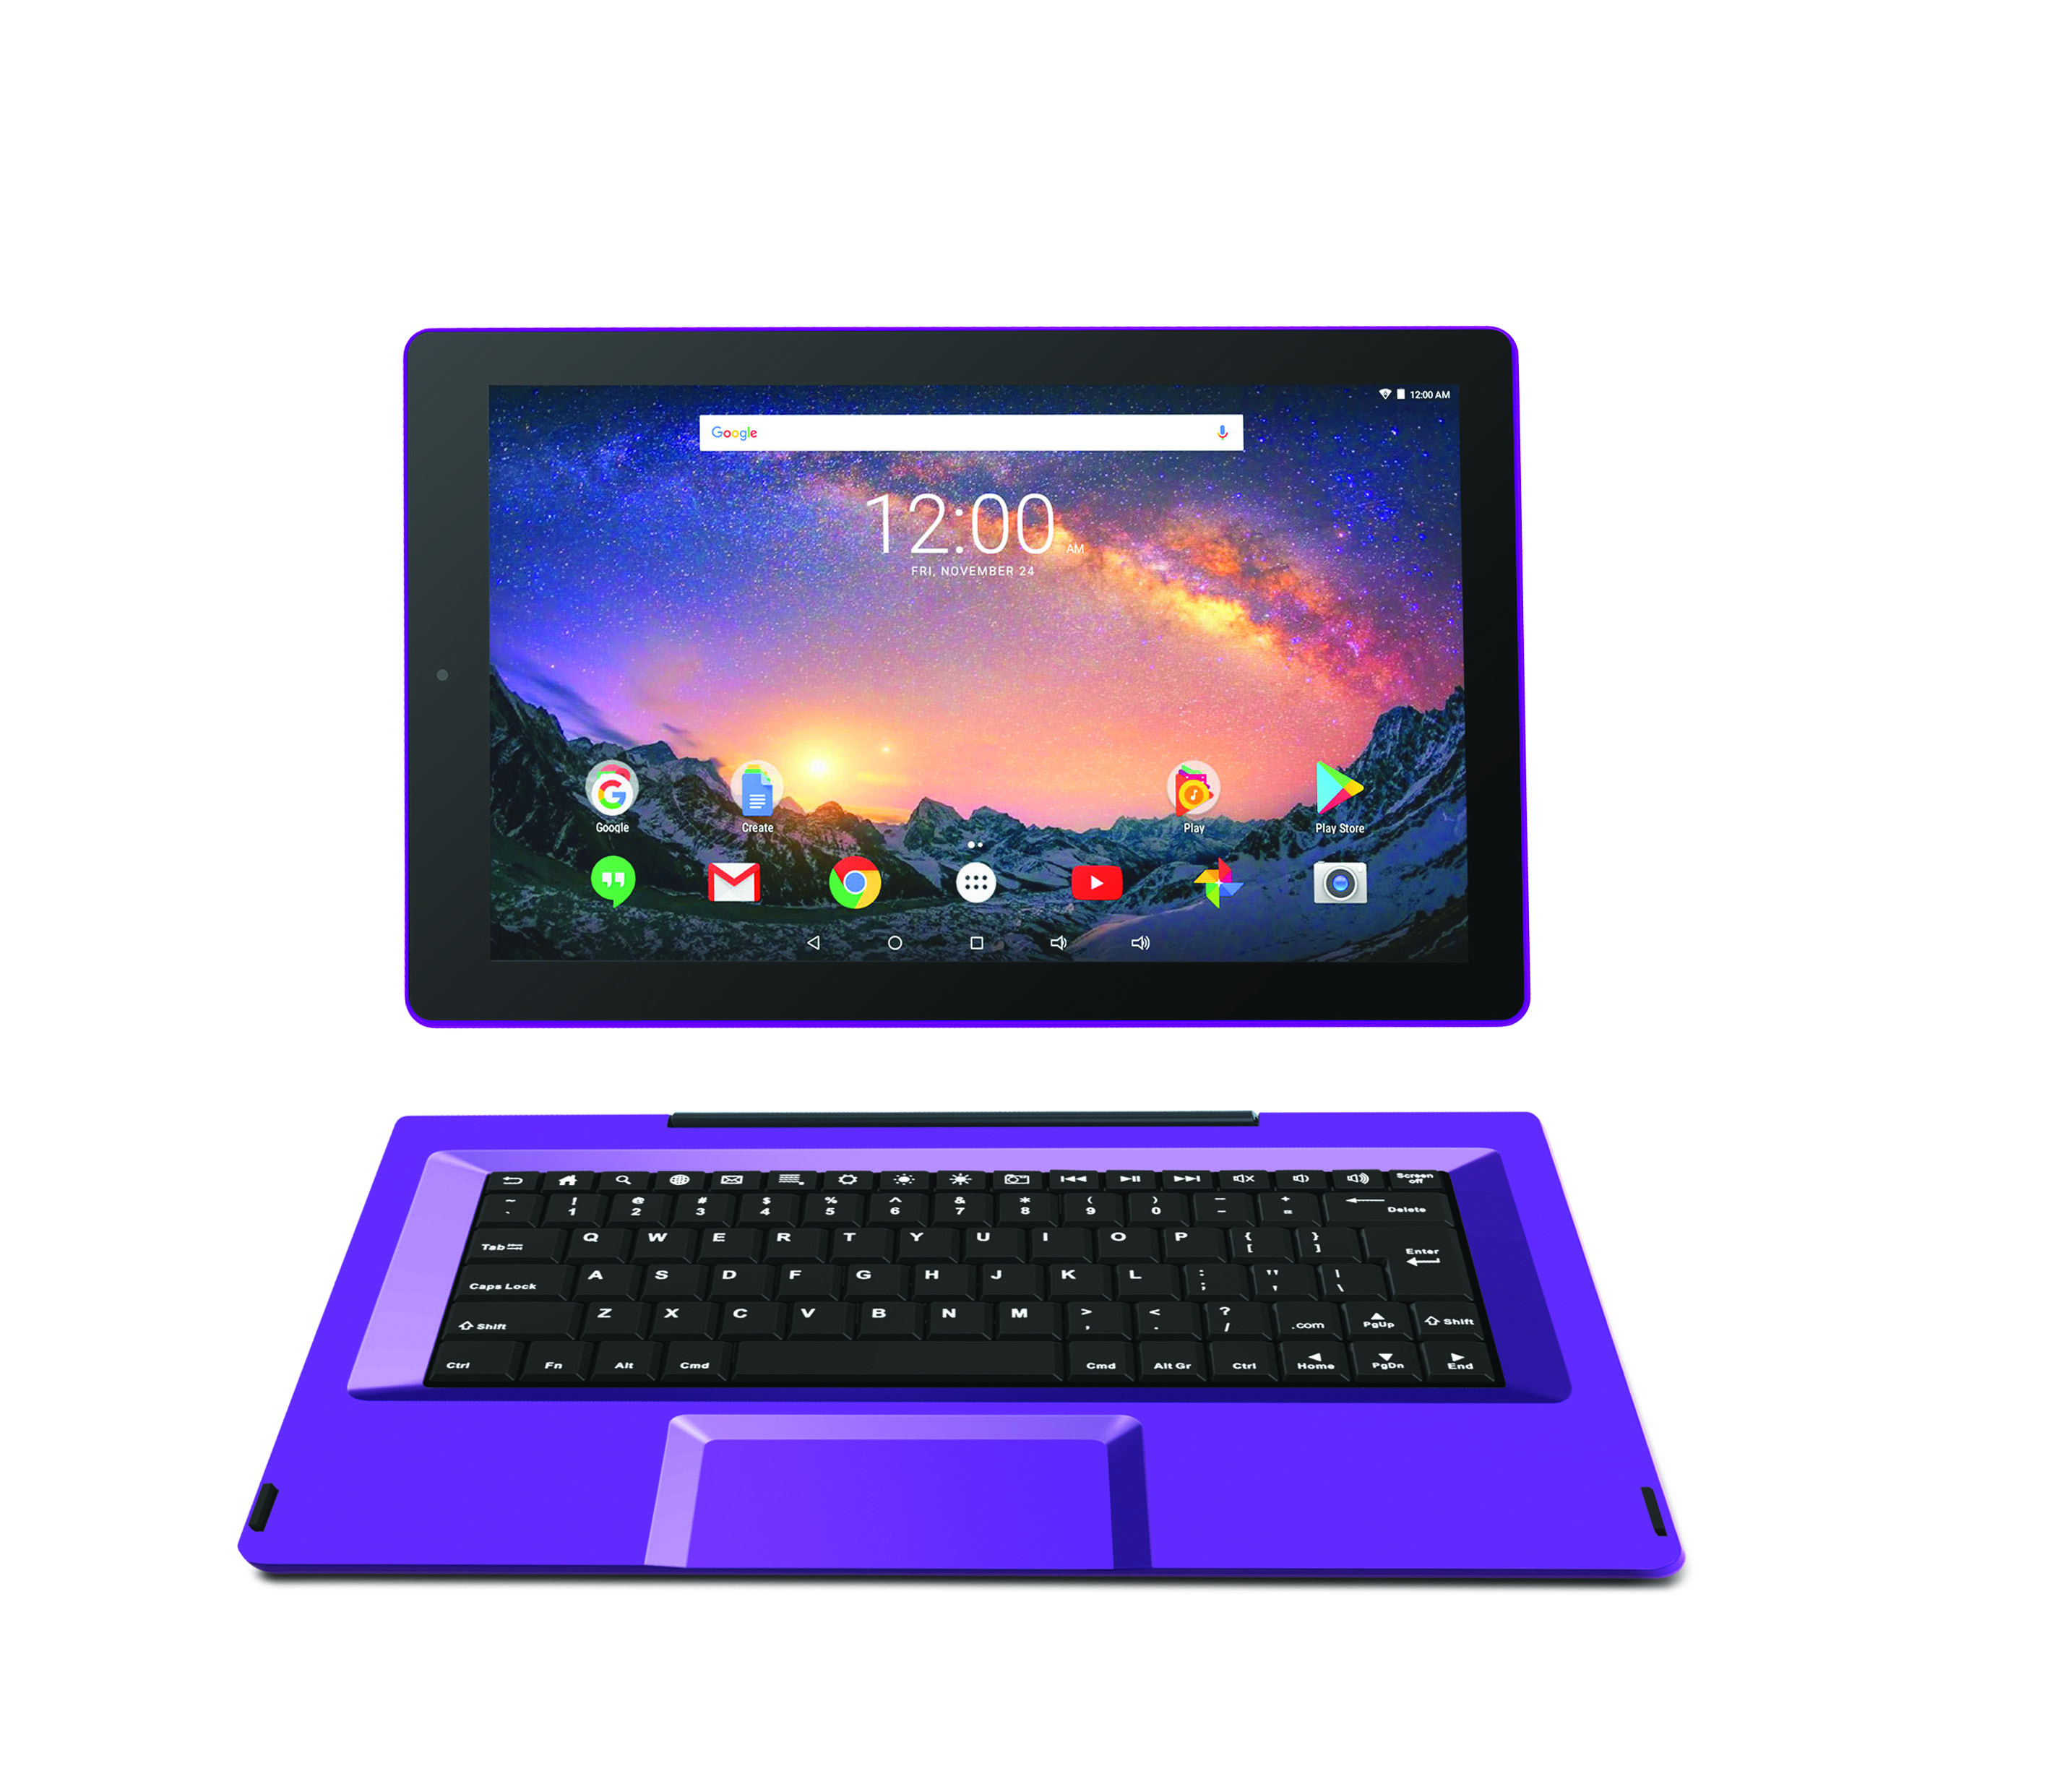 RCA Galileo Pro 11.5" 32GB 2-in-1 Tablet with Keyboard Case Android OS, Purple (Google Classroom Ready) - image 5 of 5